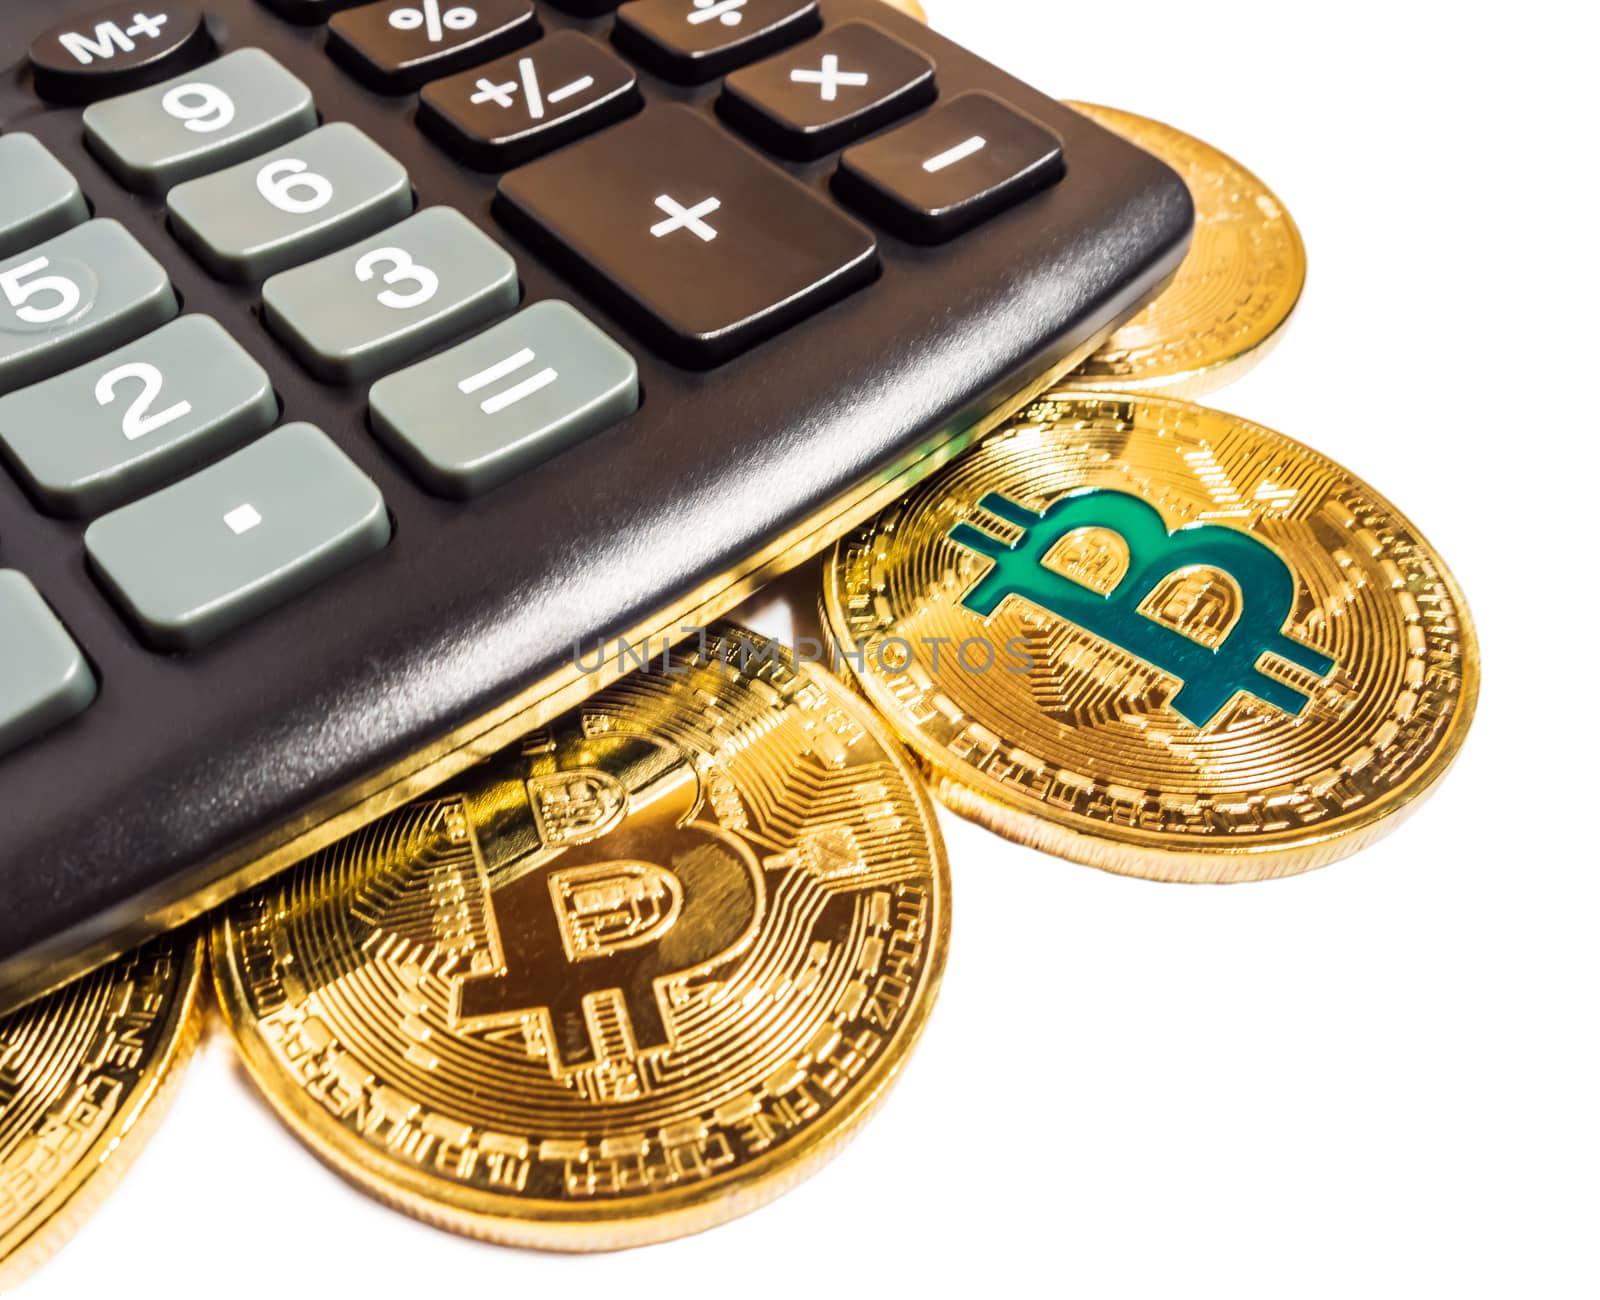 Black electronic calculator Gold bitcoin coin Business concept isolated on white background.